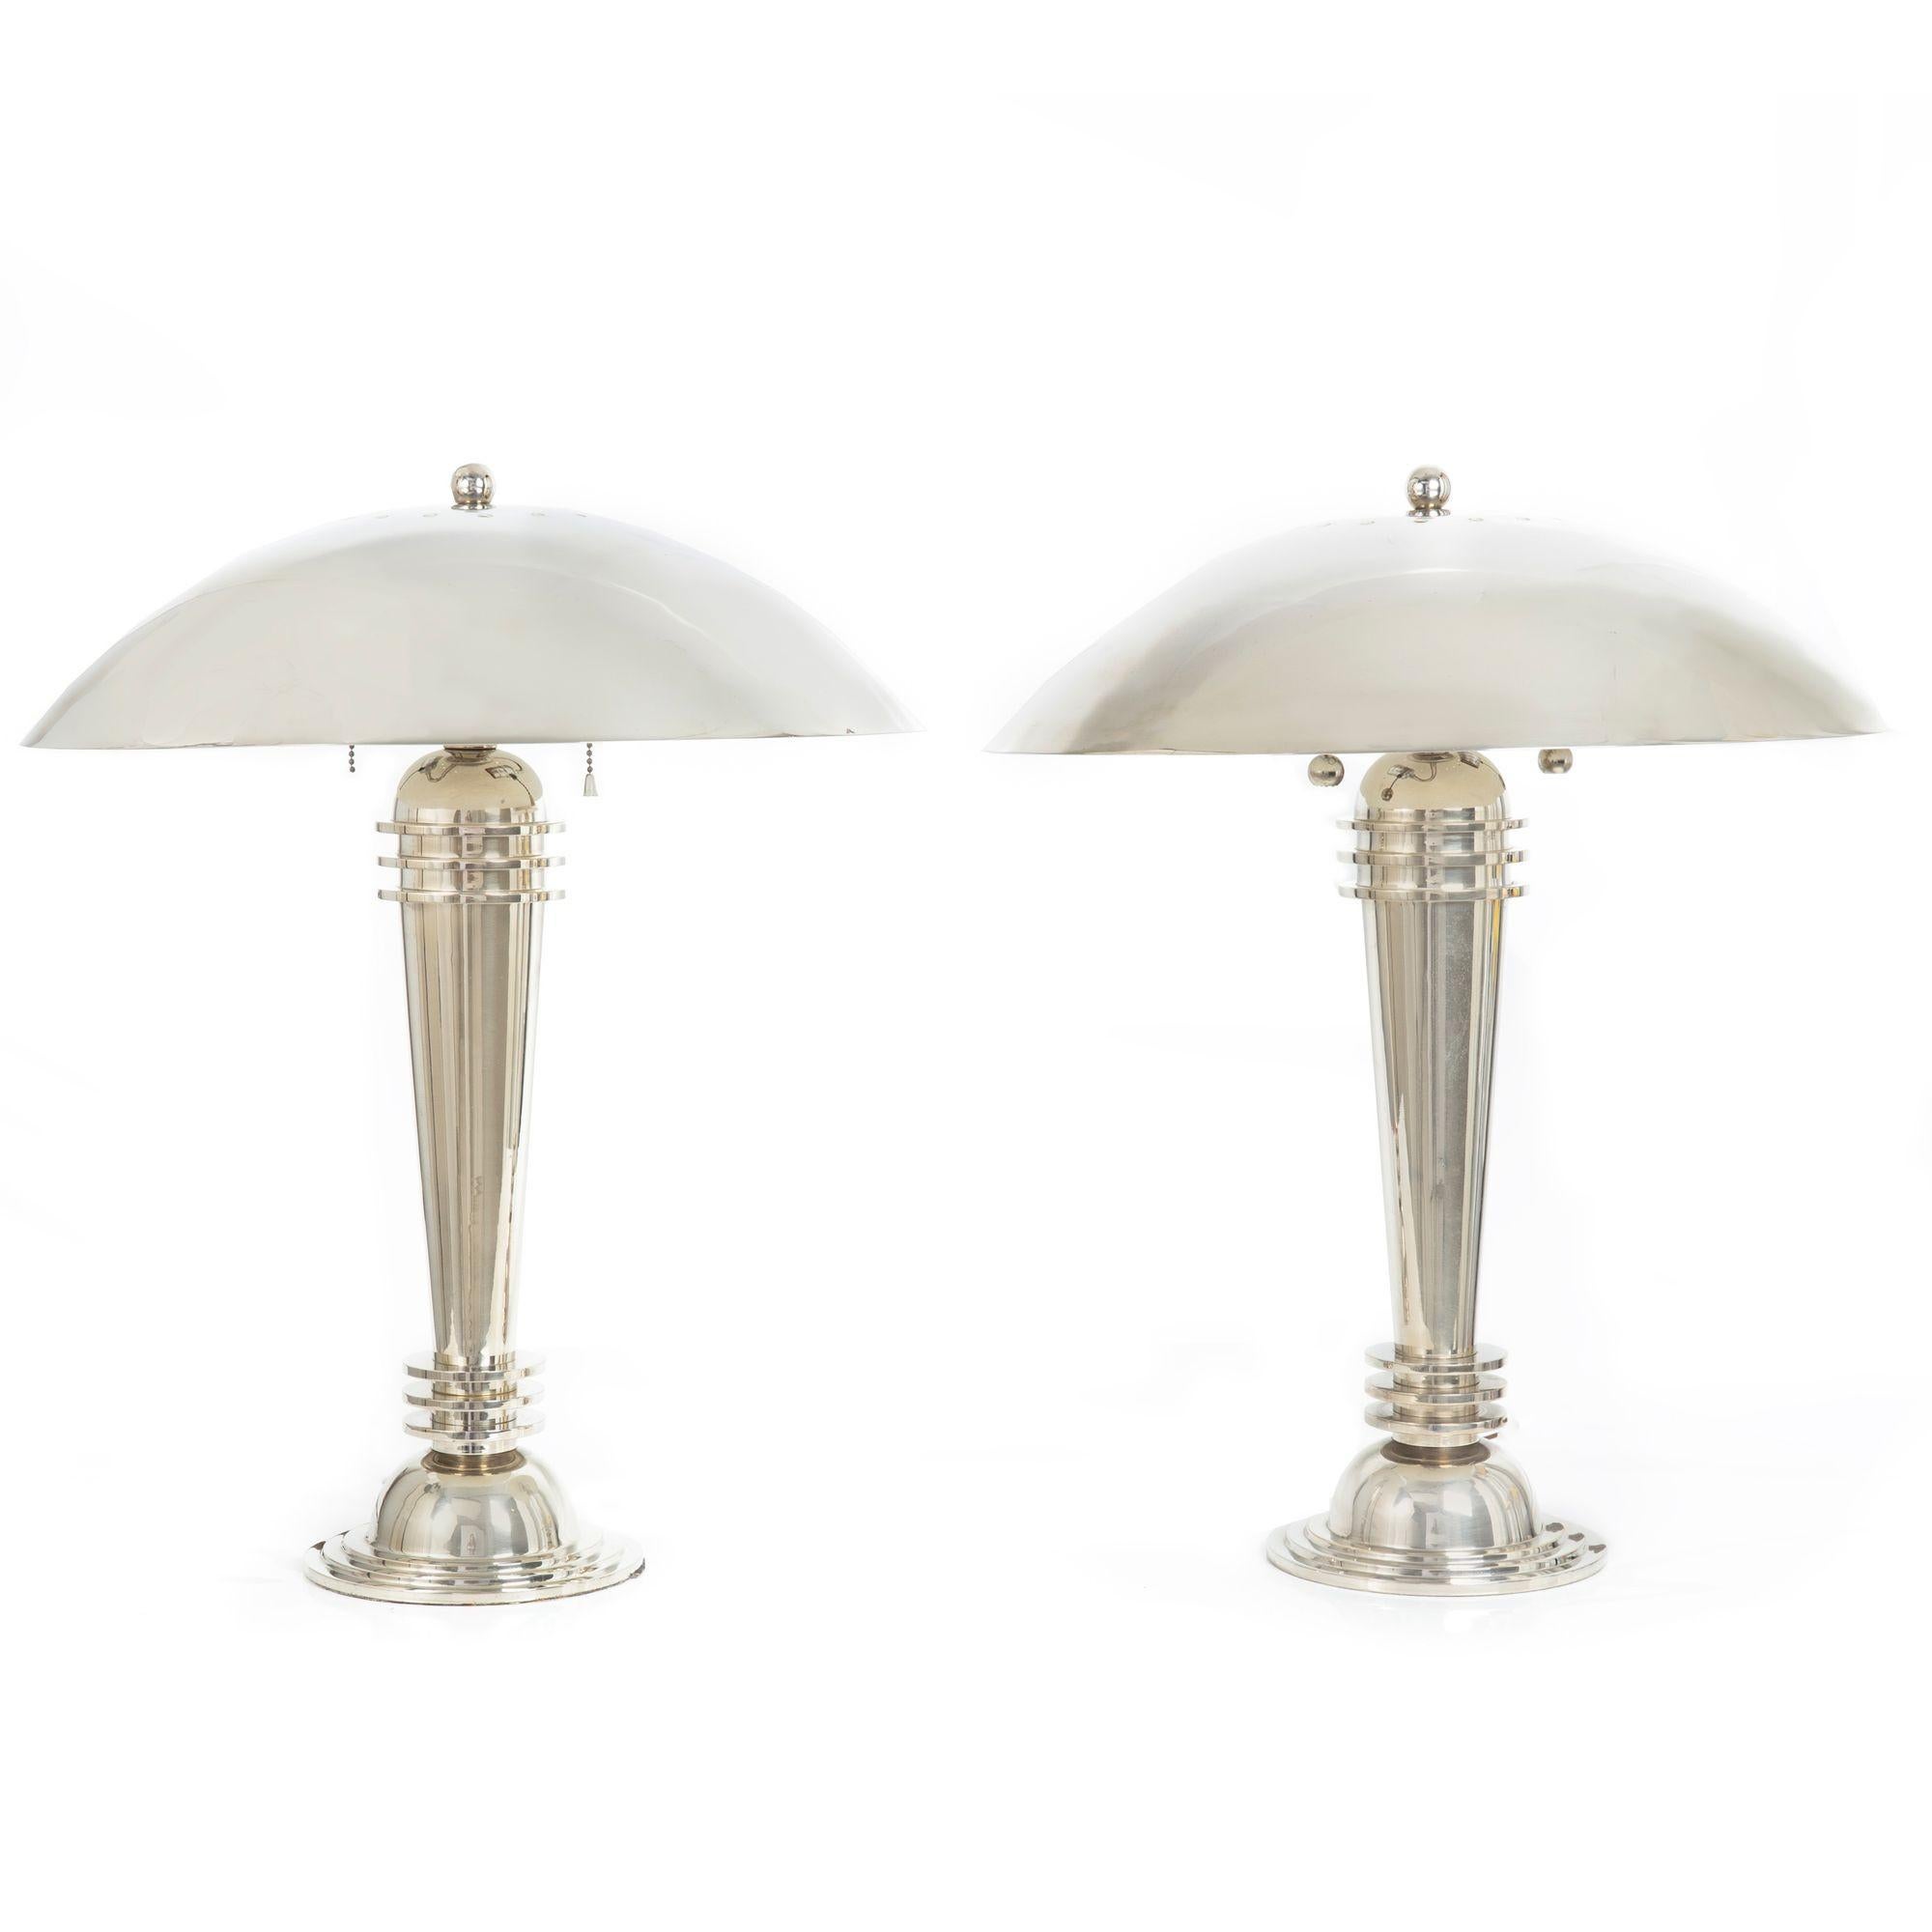 PAIR OF CHROMED TABLE LAMPS IN THE ART DECO TASTE
Unmarked, circa late 20th century based on the 1925 American design
Item # 402TPI08P

A stunning pair of chromed table lamps in the Streamline Moderne style that was born in the Art Deco period, they